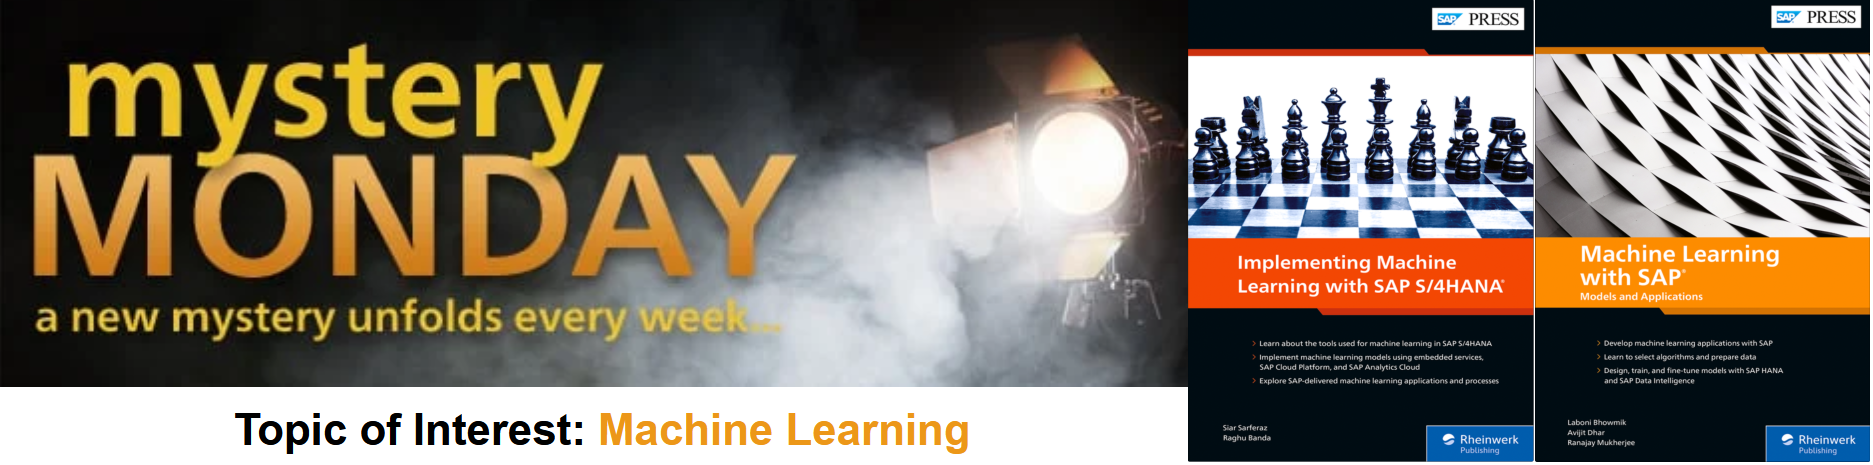 Machine Learning with SAP